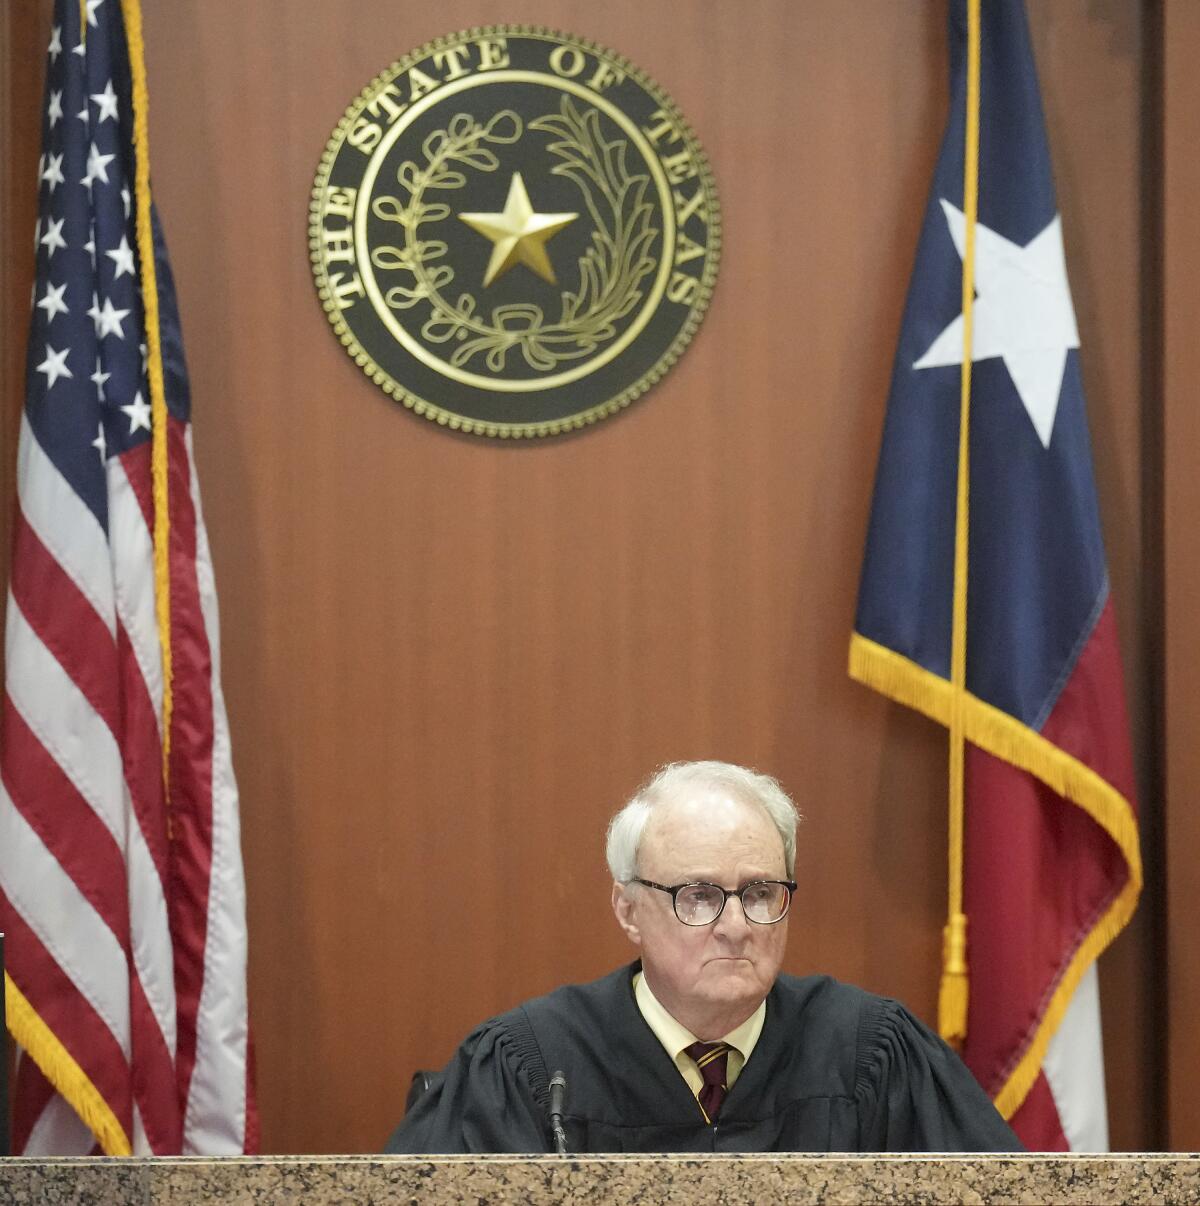 Judge David Peeples sits below a Texas state seal flanked by two flags.